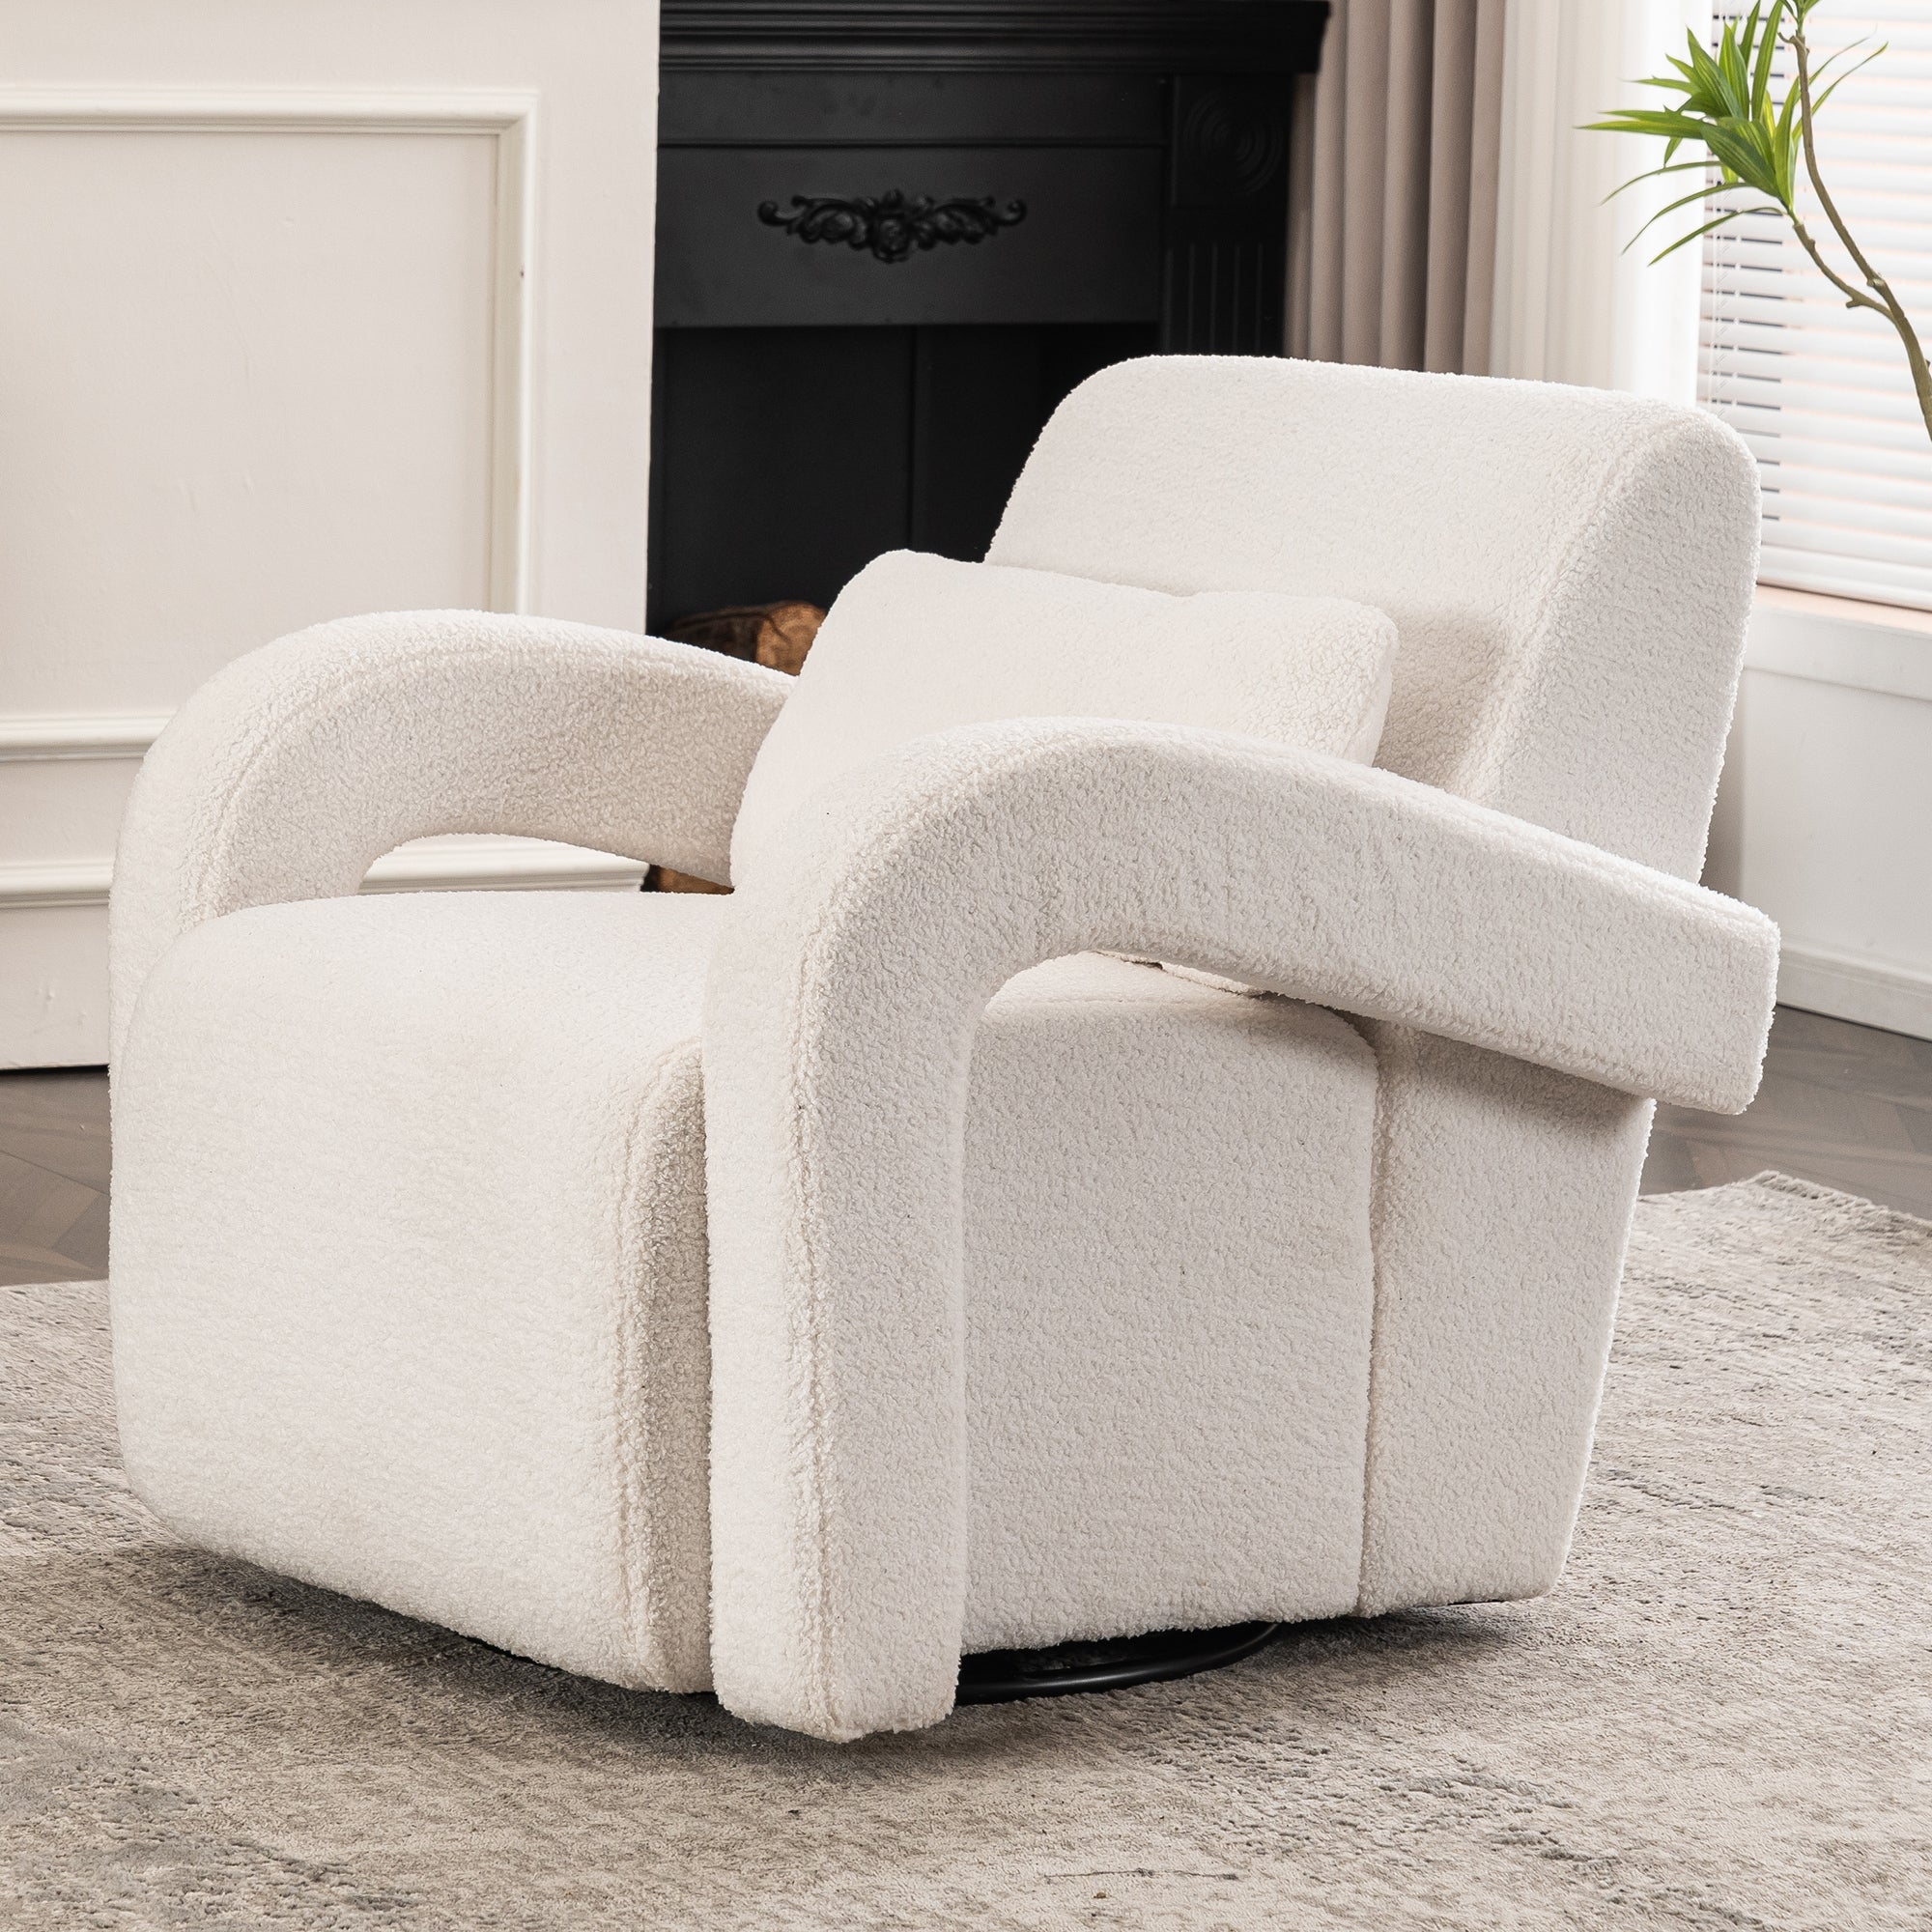 🆓🚛 Cozy Teddy Fabric Armchair - Modern Sturdy Lounge Chair With Curved Arms and Thick Cushioning for Plush Comfort, White